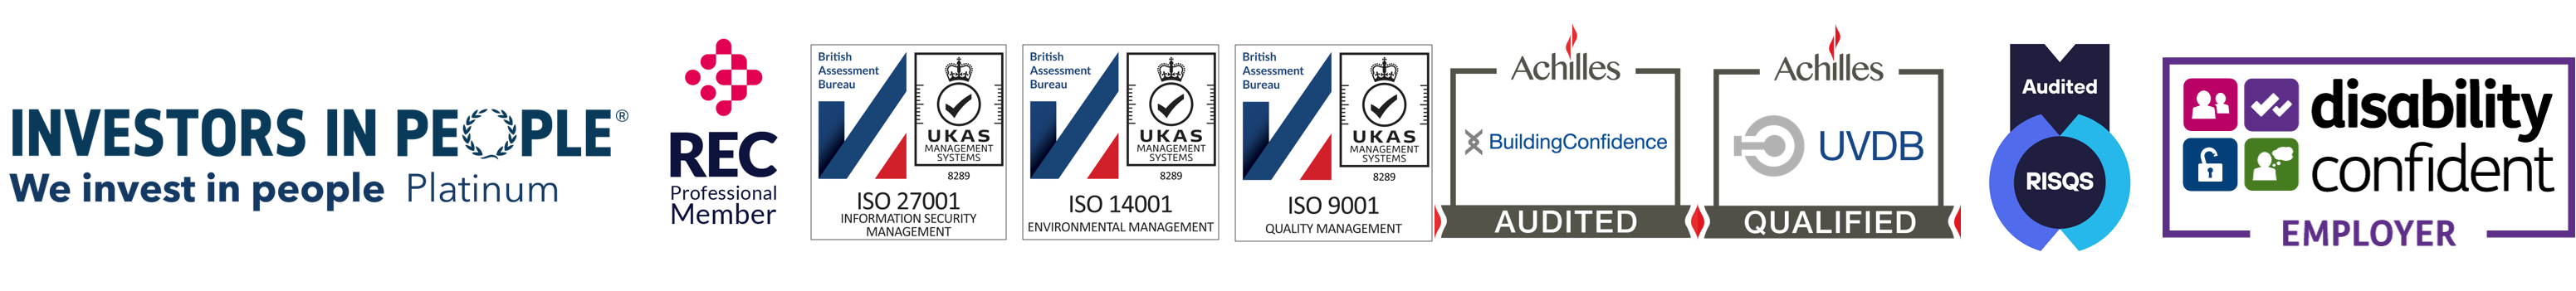 Awards and accreditations including Investors In People REC ISO RISQS Building Confidence and Disability Confidence